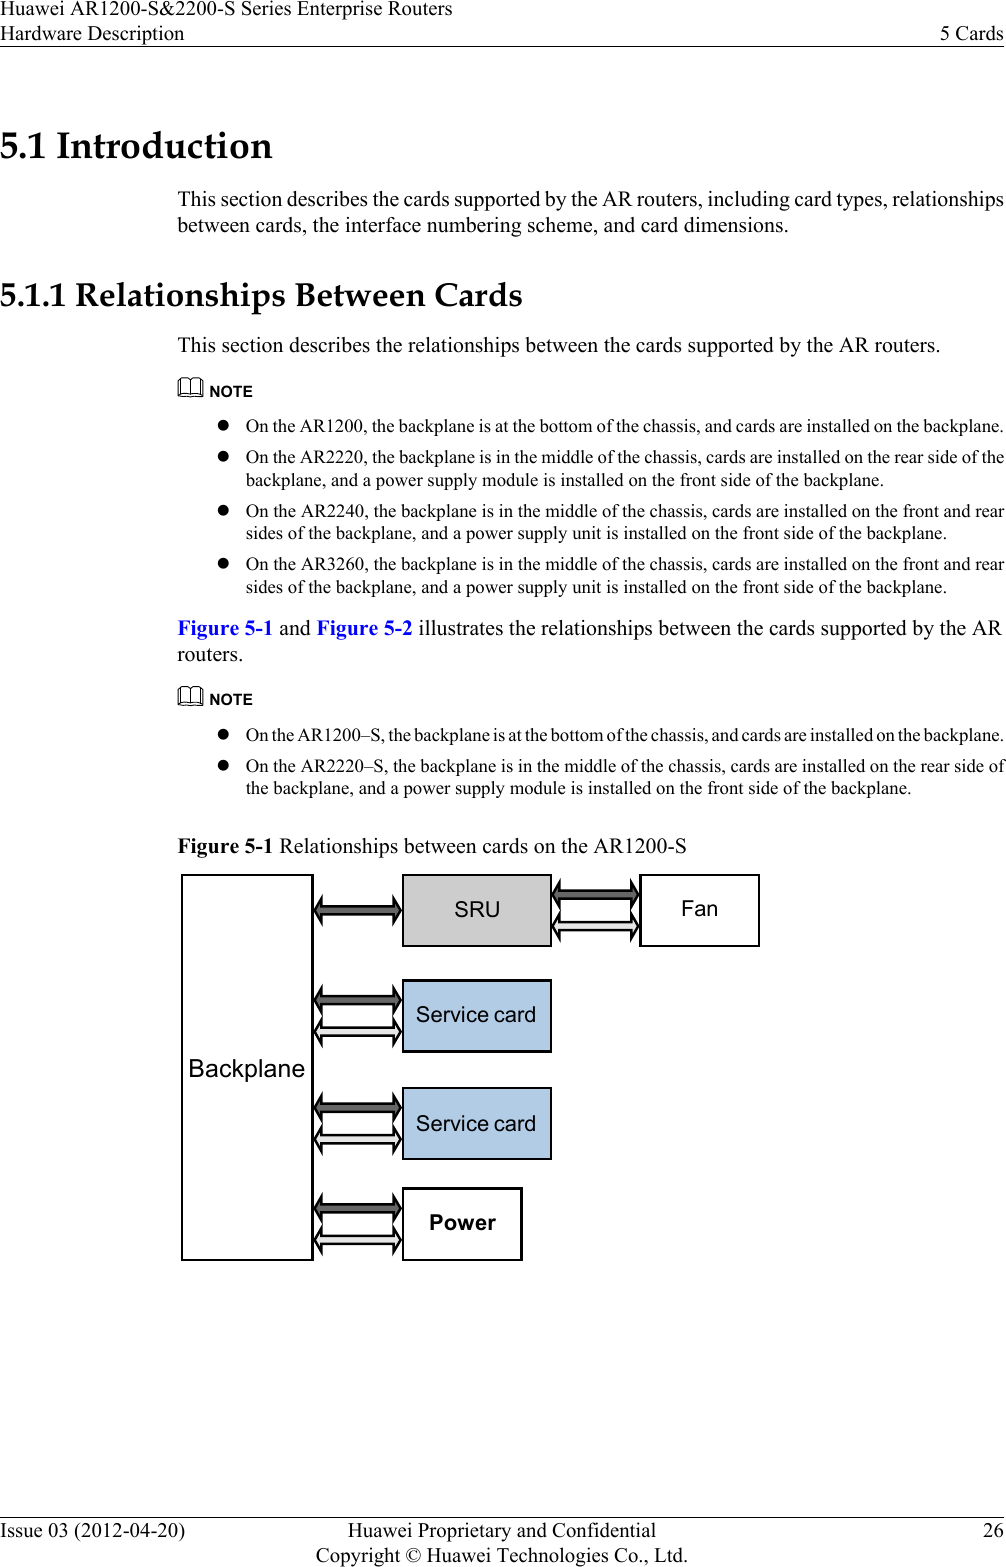 5.1 IntroductionThis section describes the cards supported by the AR routers, including card types, relationshipsbetween cards, the interface numbering scheme, and card dimensions.5.1.1 Relationships Between CardsThis section describes the relationships between the cards supported by the AR routers.NOTElOn the AR1200, the backplane is at the bottom of the chassis, and cards are installed on the backplane.lOn the AR2220, the backplane is in the middle of the chassis, cards are installed on the rear side of thebackplane, and a power supply module is installed on the front side of the backplane.lOn the AR2240, the backplane is in the middle of the chassis, cards are installed on the front and rearsides of the backplane, and a power supply unit is installed on the front side of the backplane.lOn the AR3260, the backplane is in the middle of the chassis, cards are installed on the front and rearsides of the backplane, and a power supply unit is installed on the front side of the backplane.Figure 5-1 and Figure 5-2 illustrates the relationships between the cards supported by the ARrouters.NOTElOn the AR1200–S, the backplane is at the bottom of the chassis, and cards are installed on the backplane.lOn the AR2220–S, the backplane is in the middle of the chassis, cards are installed on the rear side ofthe backplane, and a power supply module is installed on the front side of the backplane.Figure 5-1 Relationships between cards on the AR1200-SService cardPowerBackplaneSRU FanService card Huawei AR1200-S&amp;2200-S Series Enterprise RoutersHardware Description 5 CardsIssue 03 (2012-04-20) Huawei Proprietary and ConfidentialCopyright © Huawei Technologies Co., Ltd.26